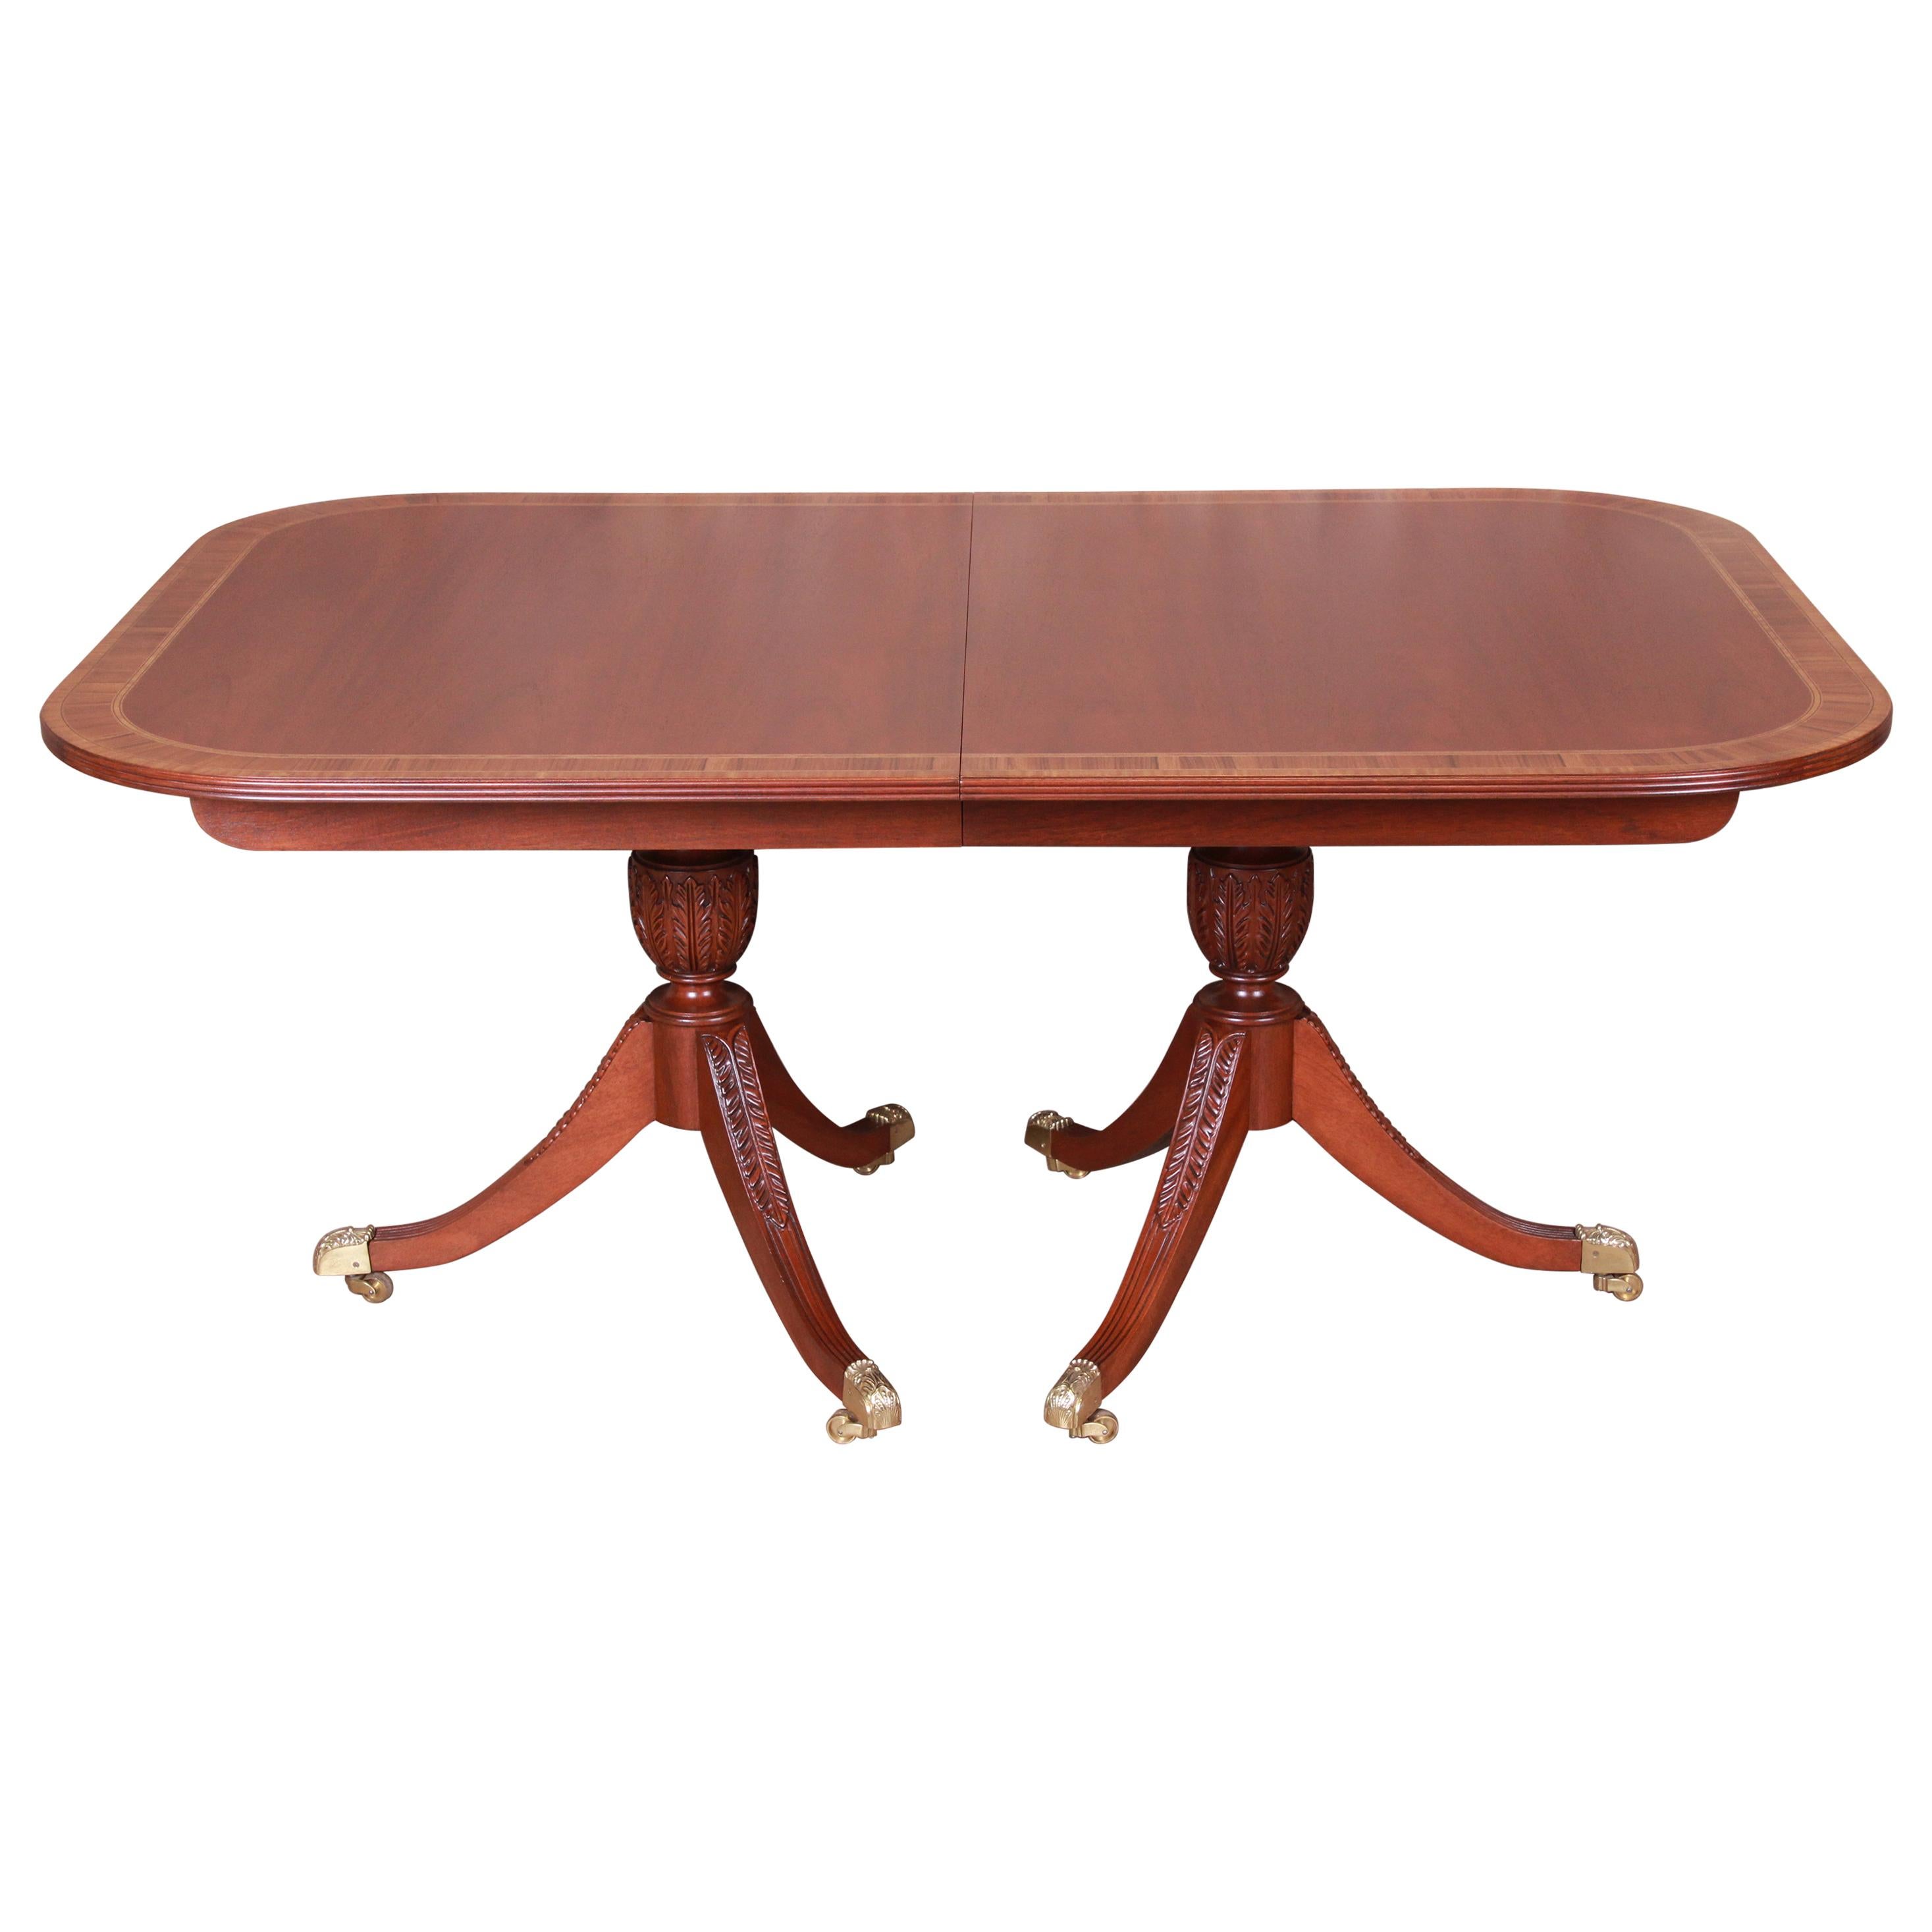 Councill Georgian Banded Mahogany Double Pedestal Dining Table, Newly Restored